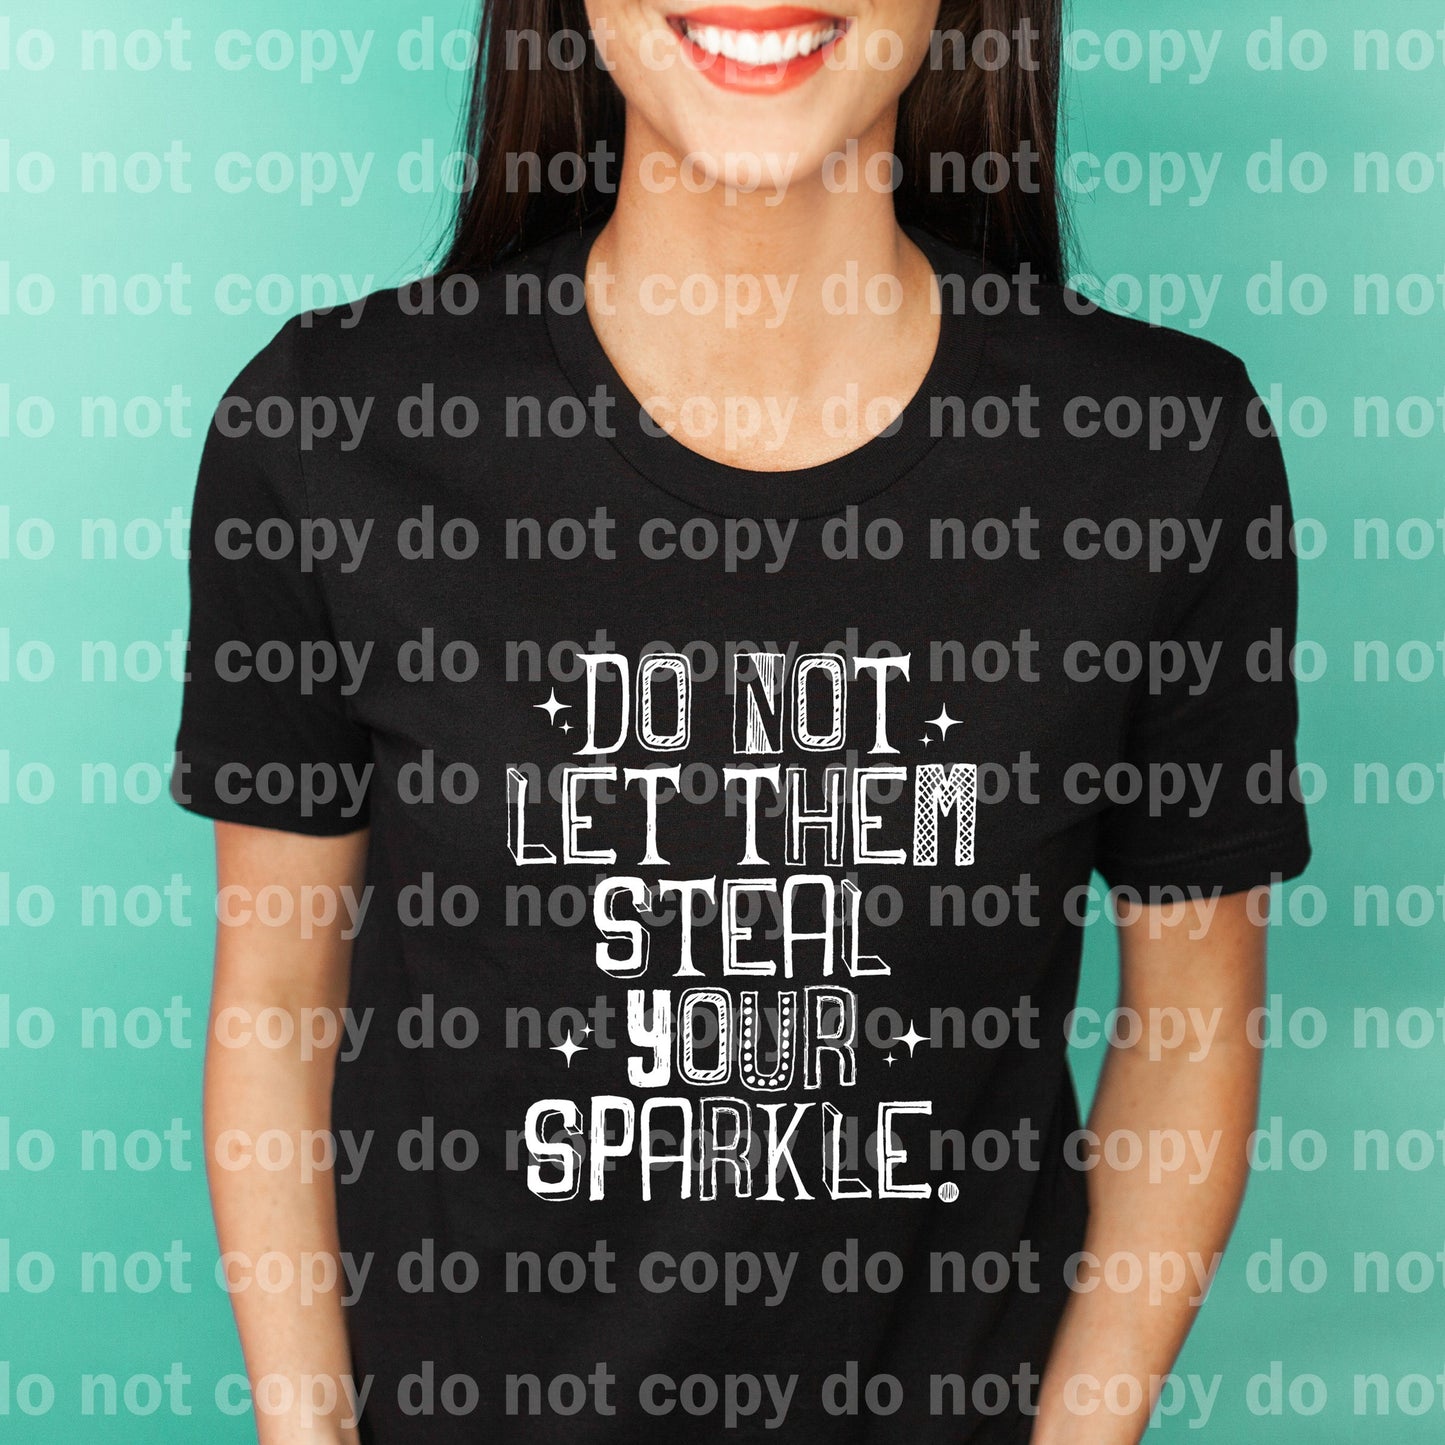 Do Not Let Them Steal Your Sparkle Black/White Dream Print or Sublimation Print